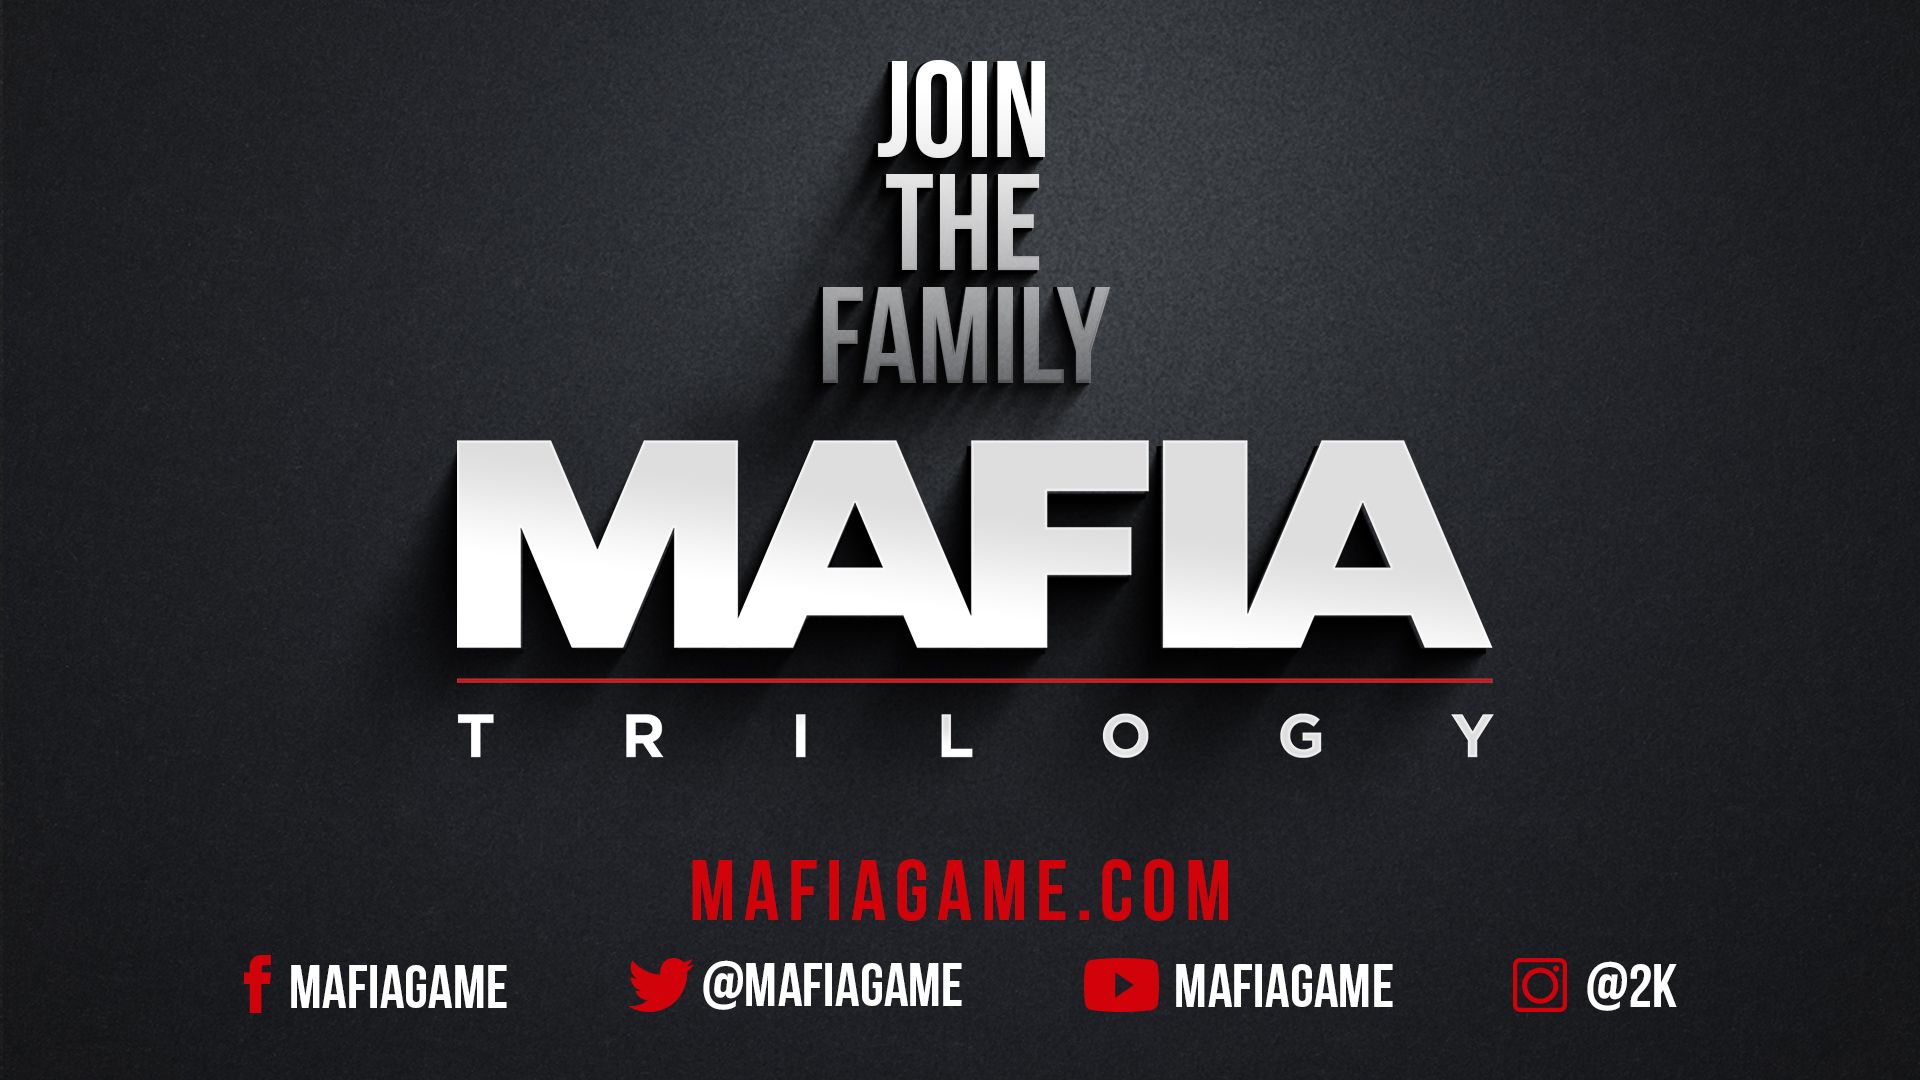 Mafia: Trilogy us on social media for all your